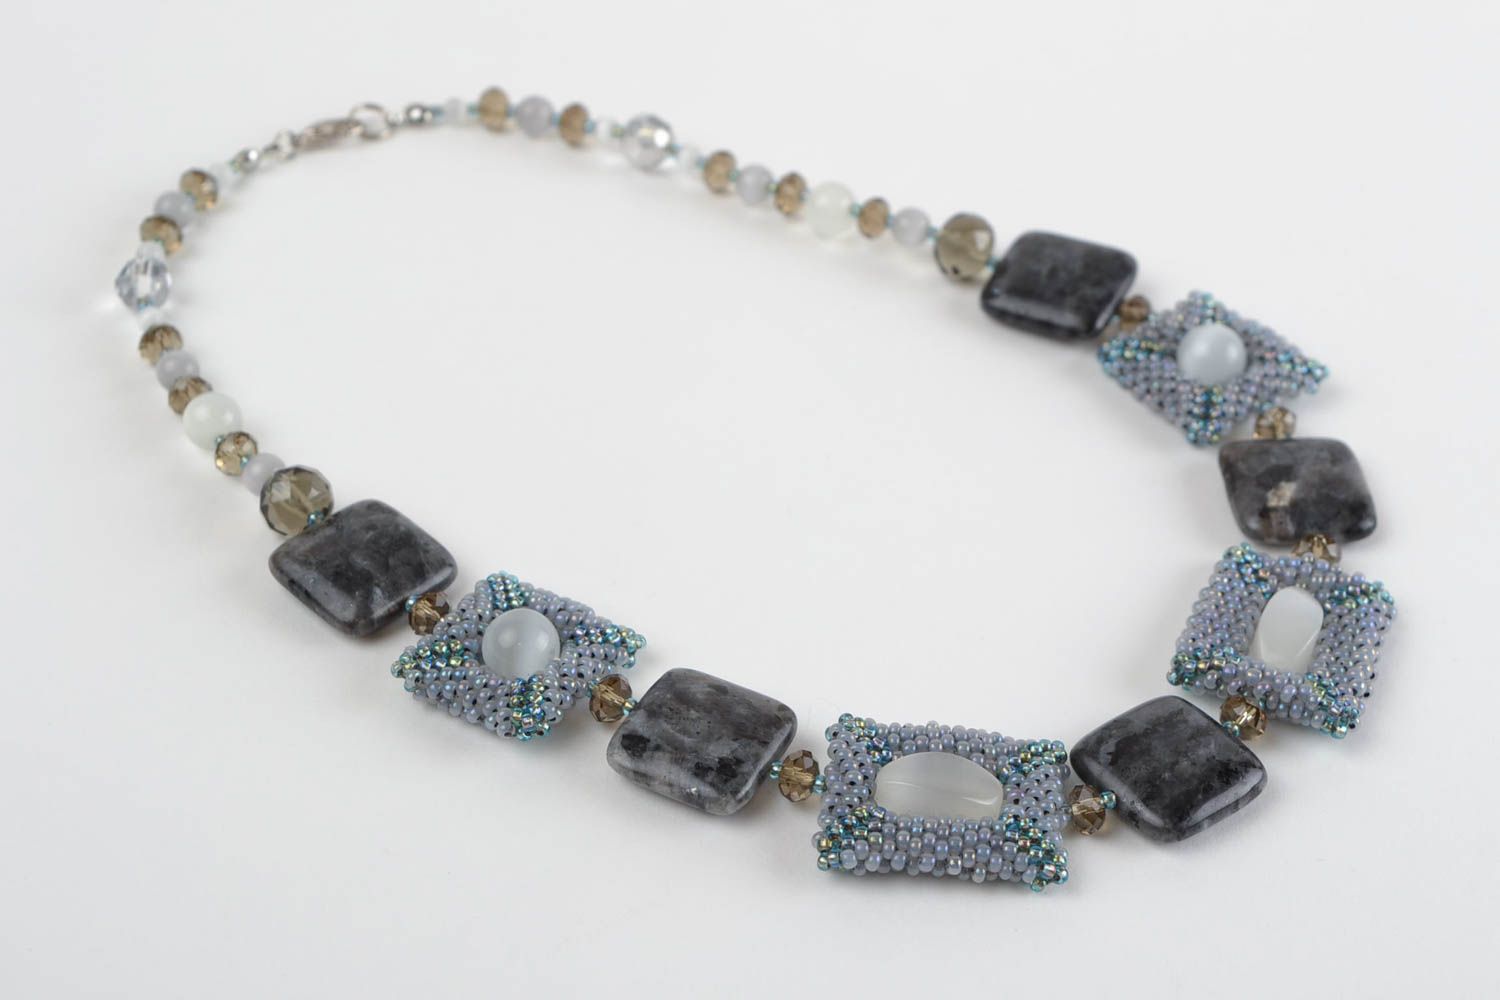 Handmade natural stone and bead woven necklace in severe gray color palette photo 5